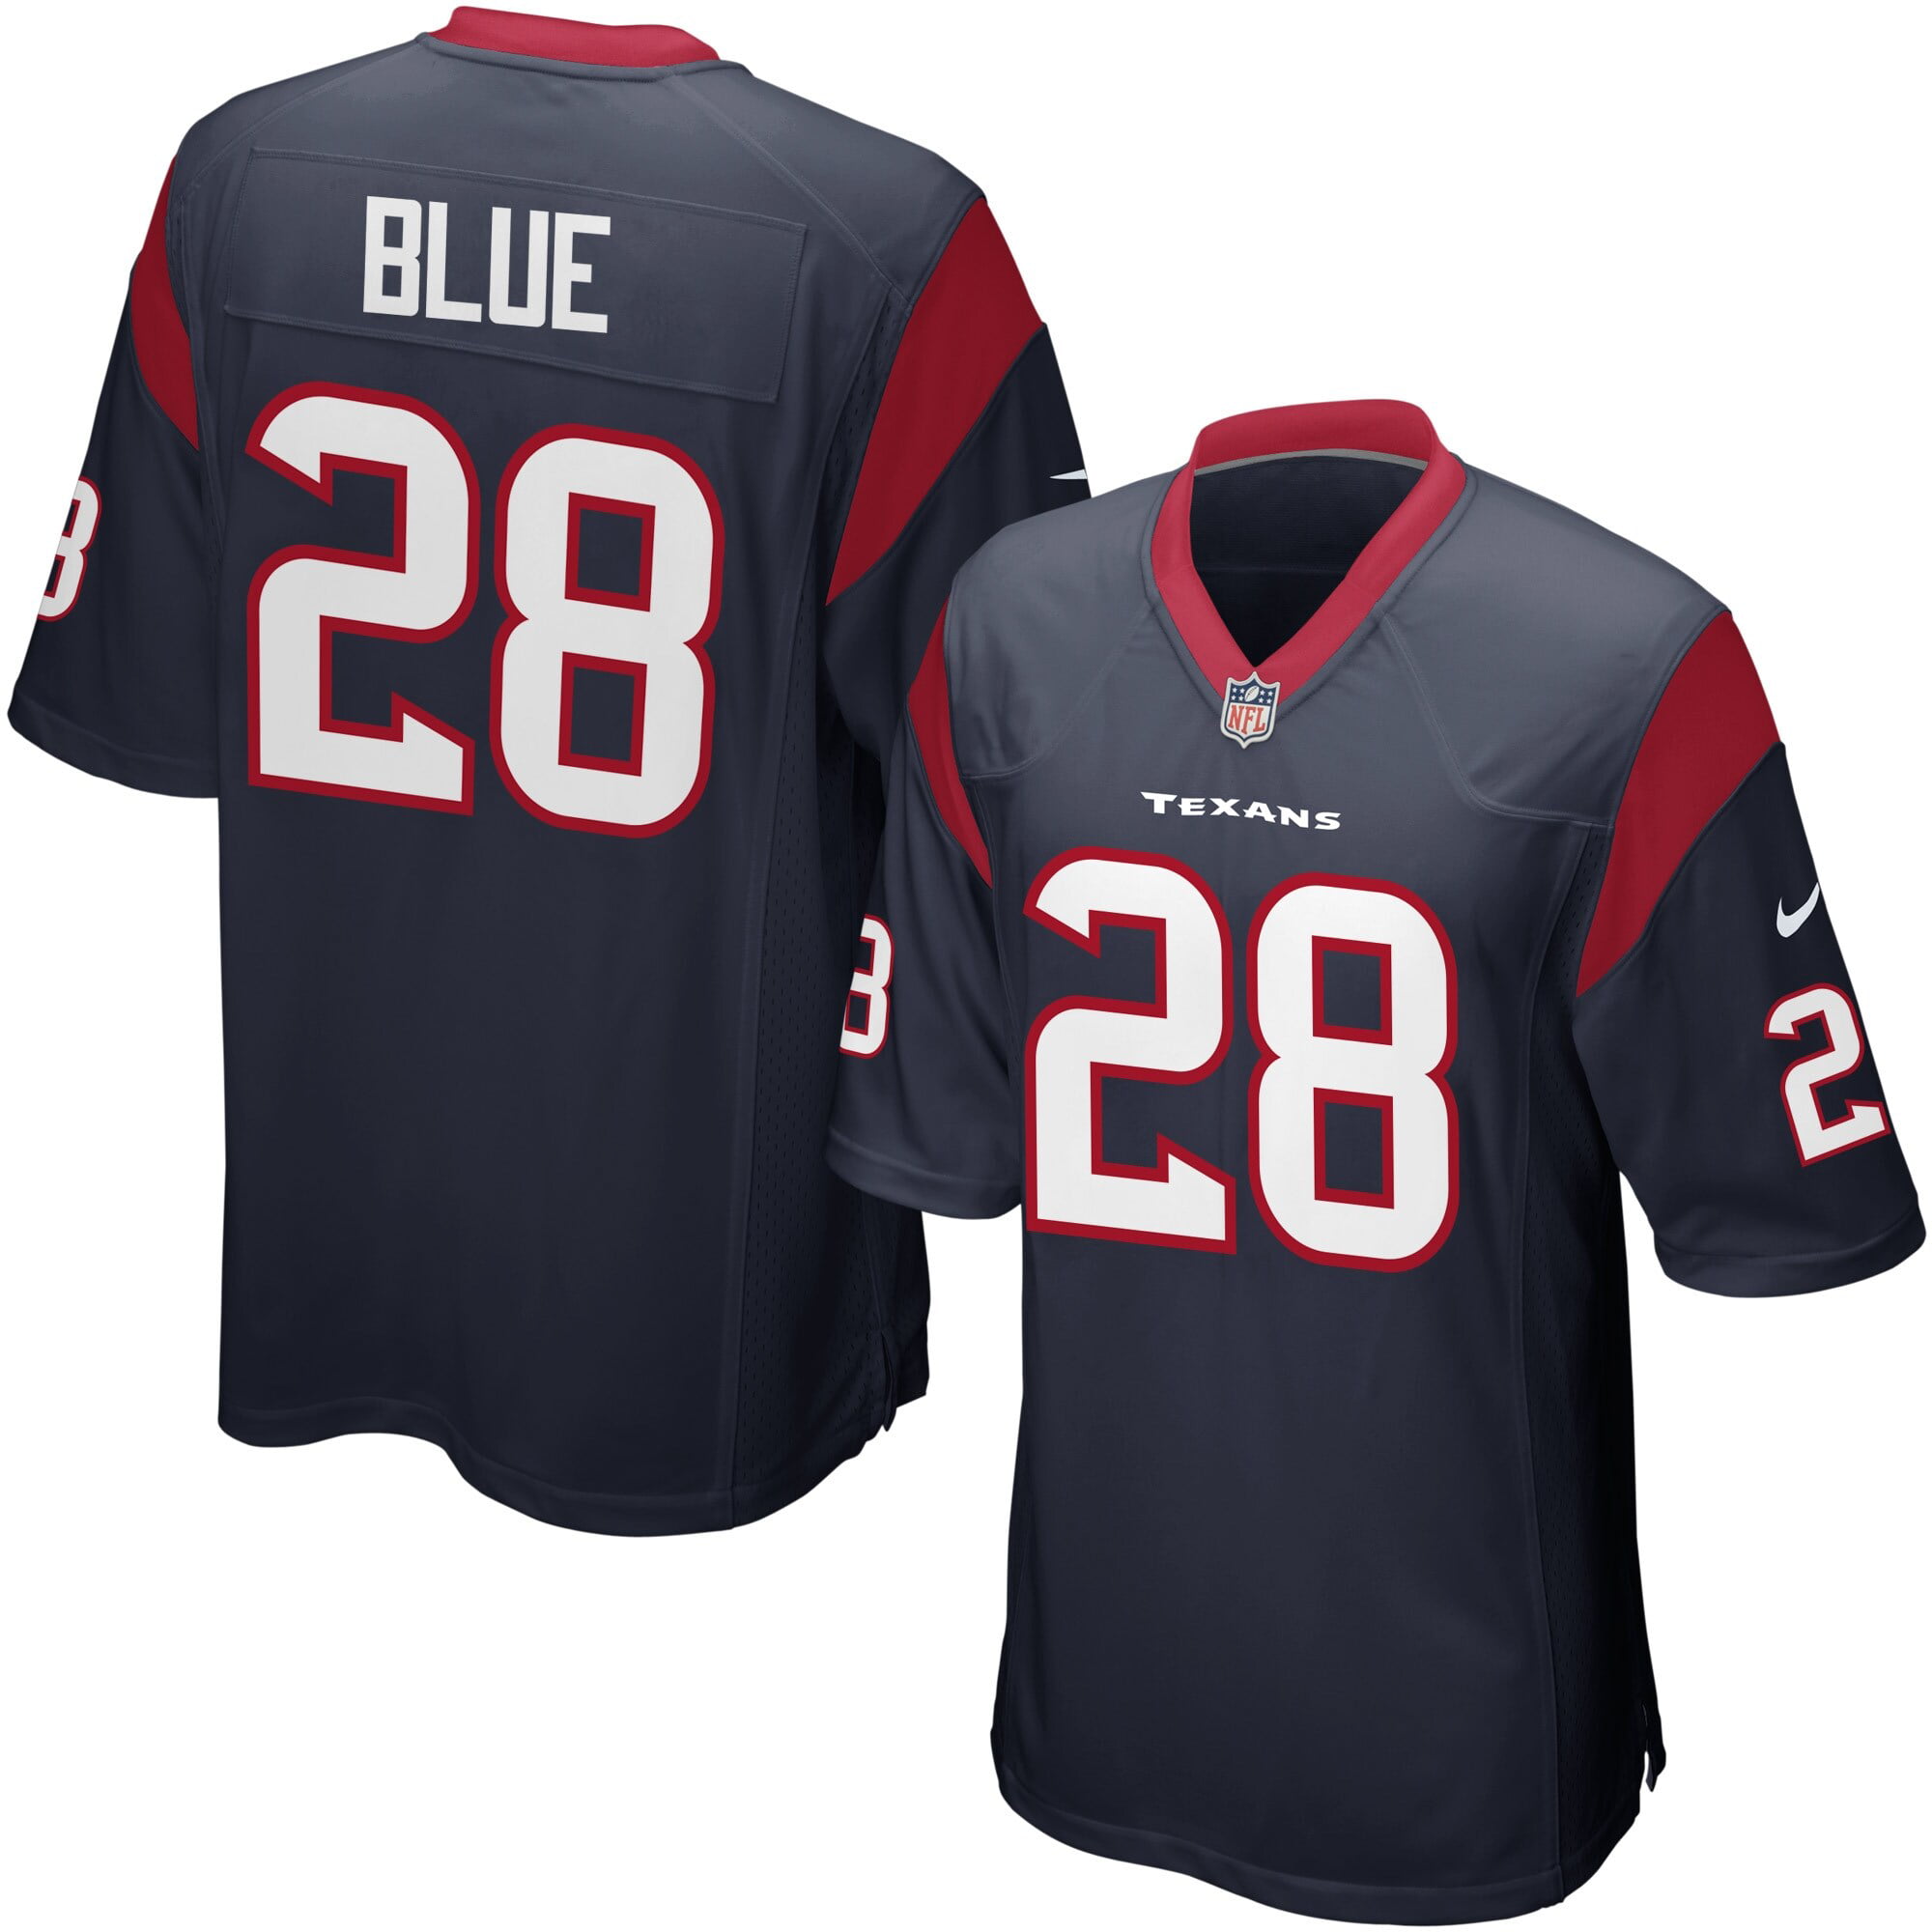 alfred blue jersey